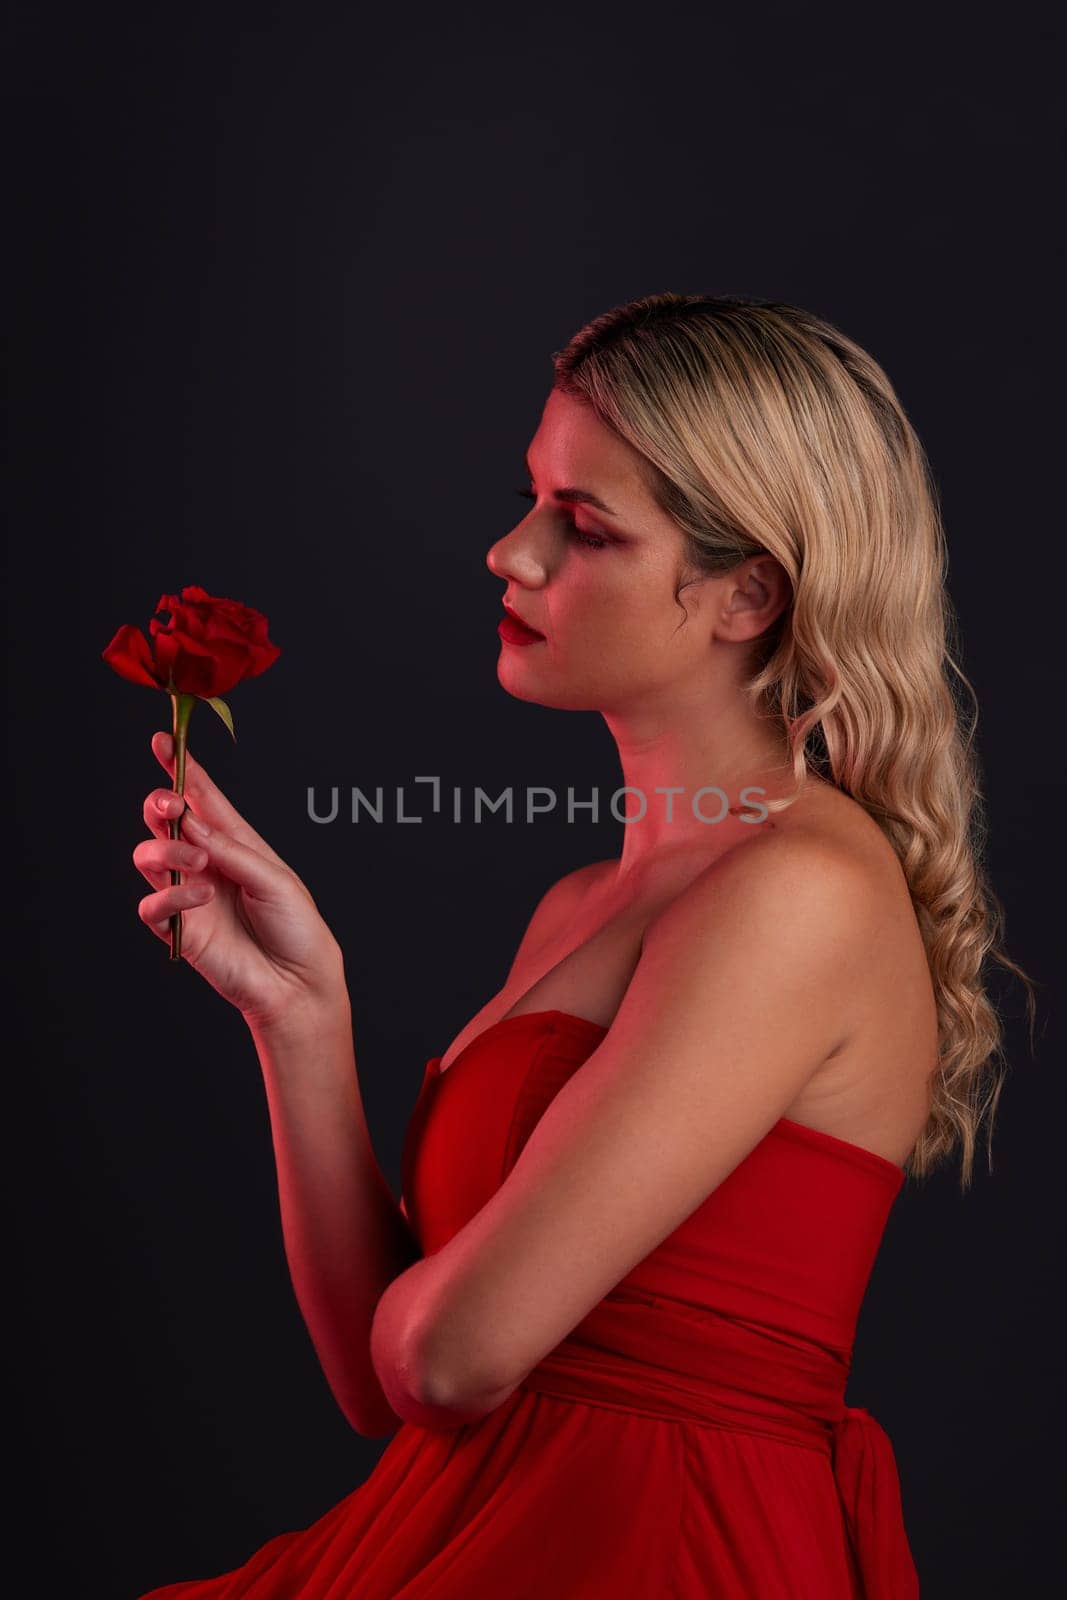 Beauty, fashion and woman with a rose on a dark, black background in a studio thinking of love, romance or red aesthetic. Girl with a flower, dress and formal style in fantasy, fairytale or art by YuriArcurs